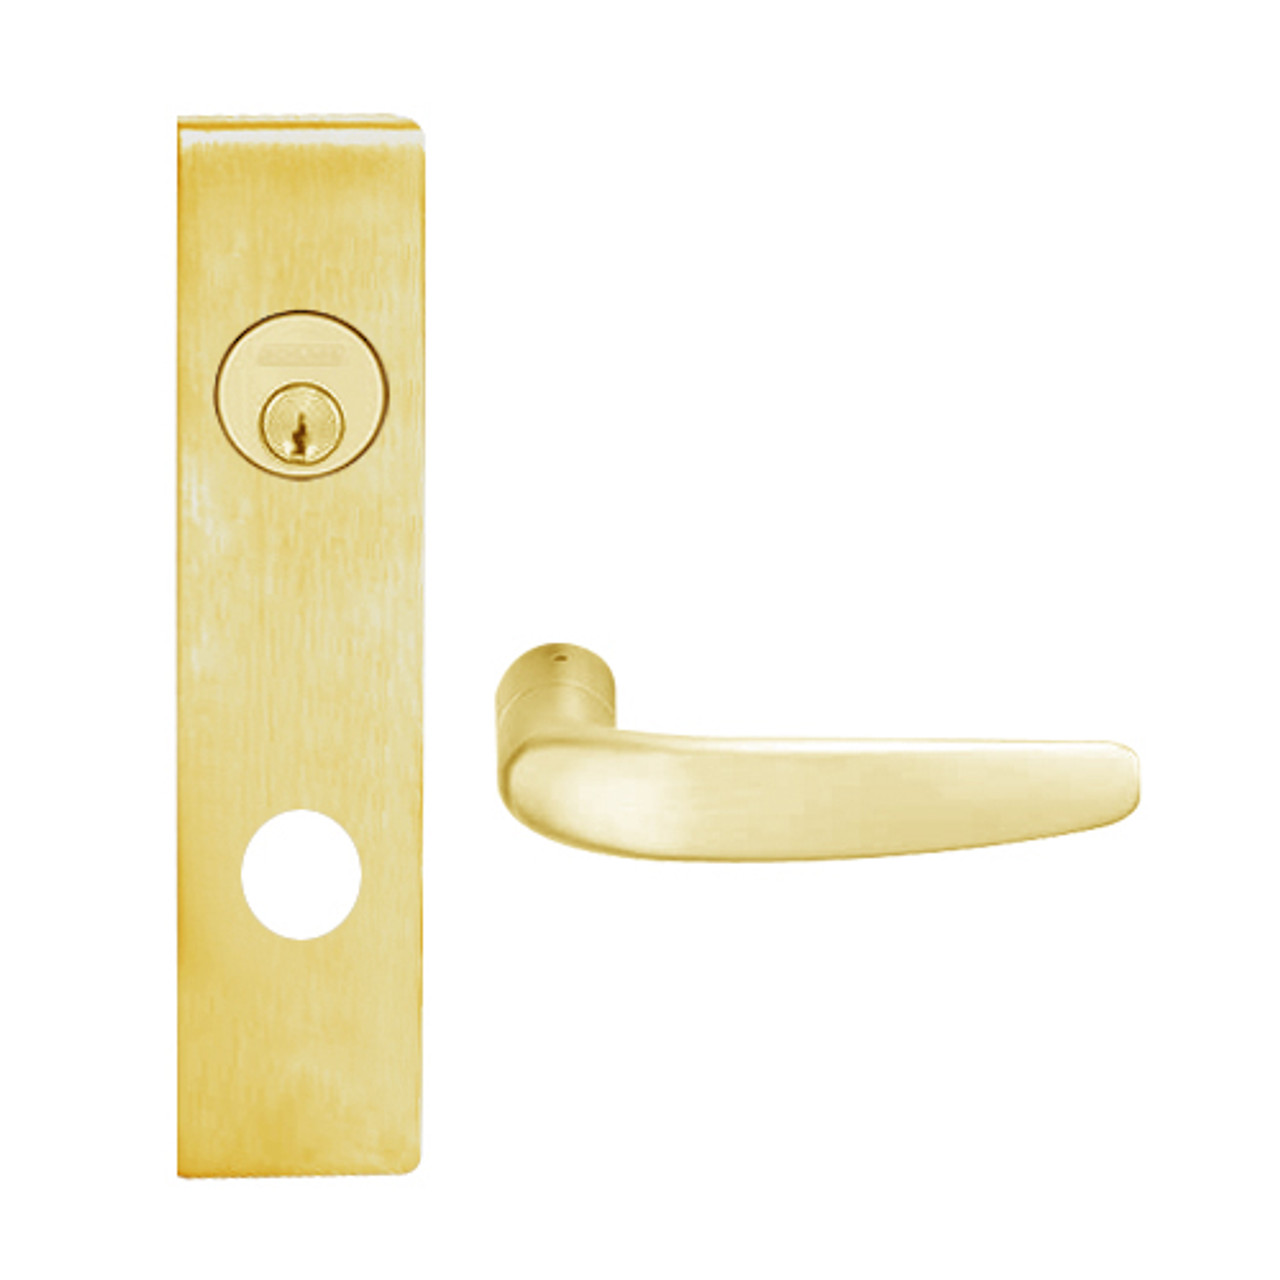 L9050L-07L-605 Schlage L Series Less Cylinder Entrance Commercial Mortise Lock with 07 Cast Lever Design in Bright Brass